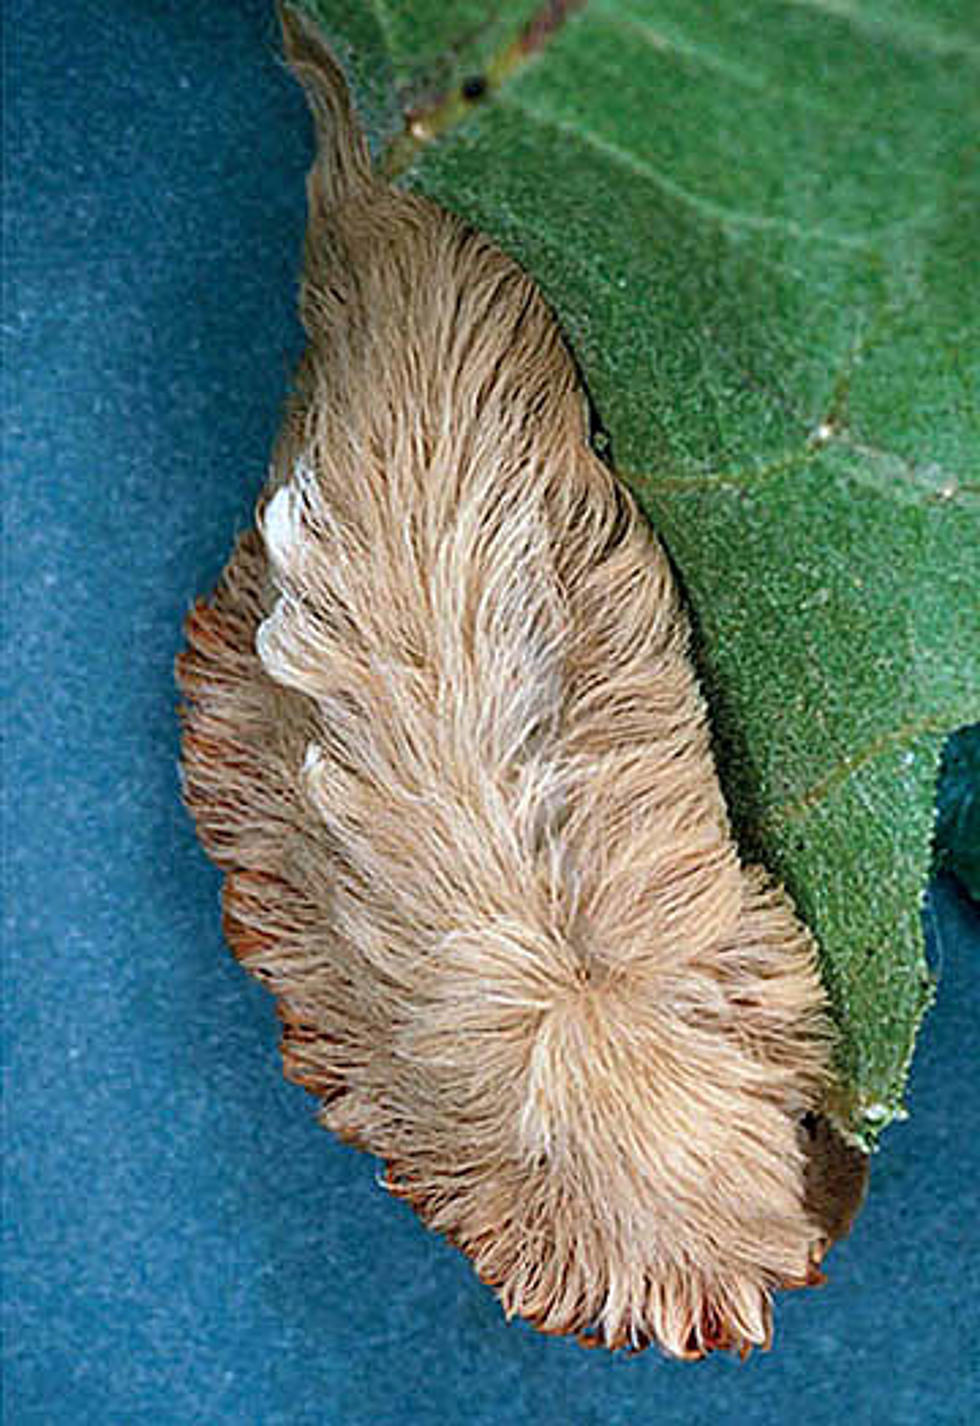 This LA Caterpillar is Named “Puss Moth” and it’s No Joke